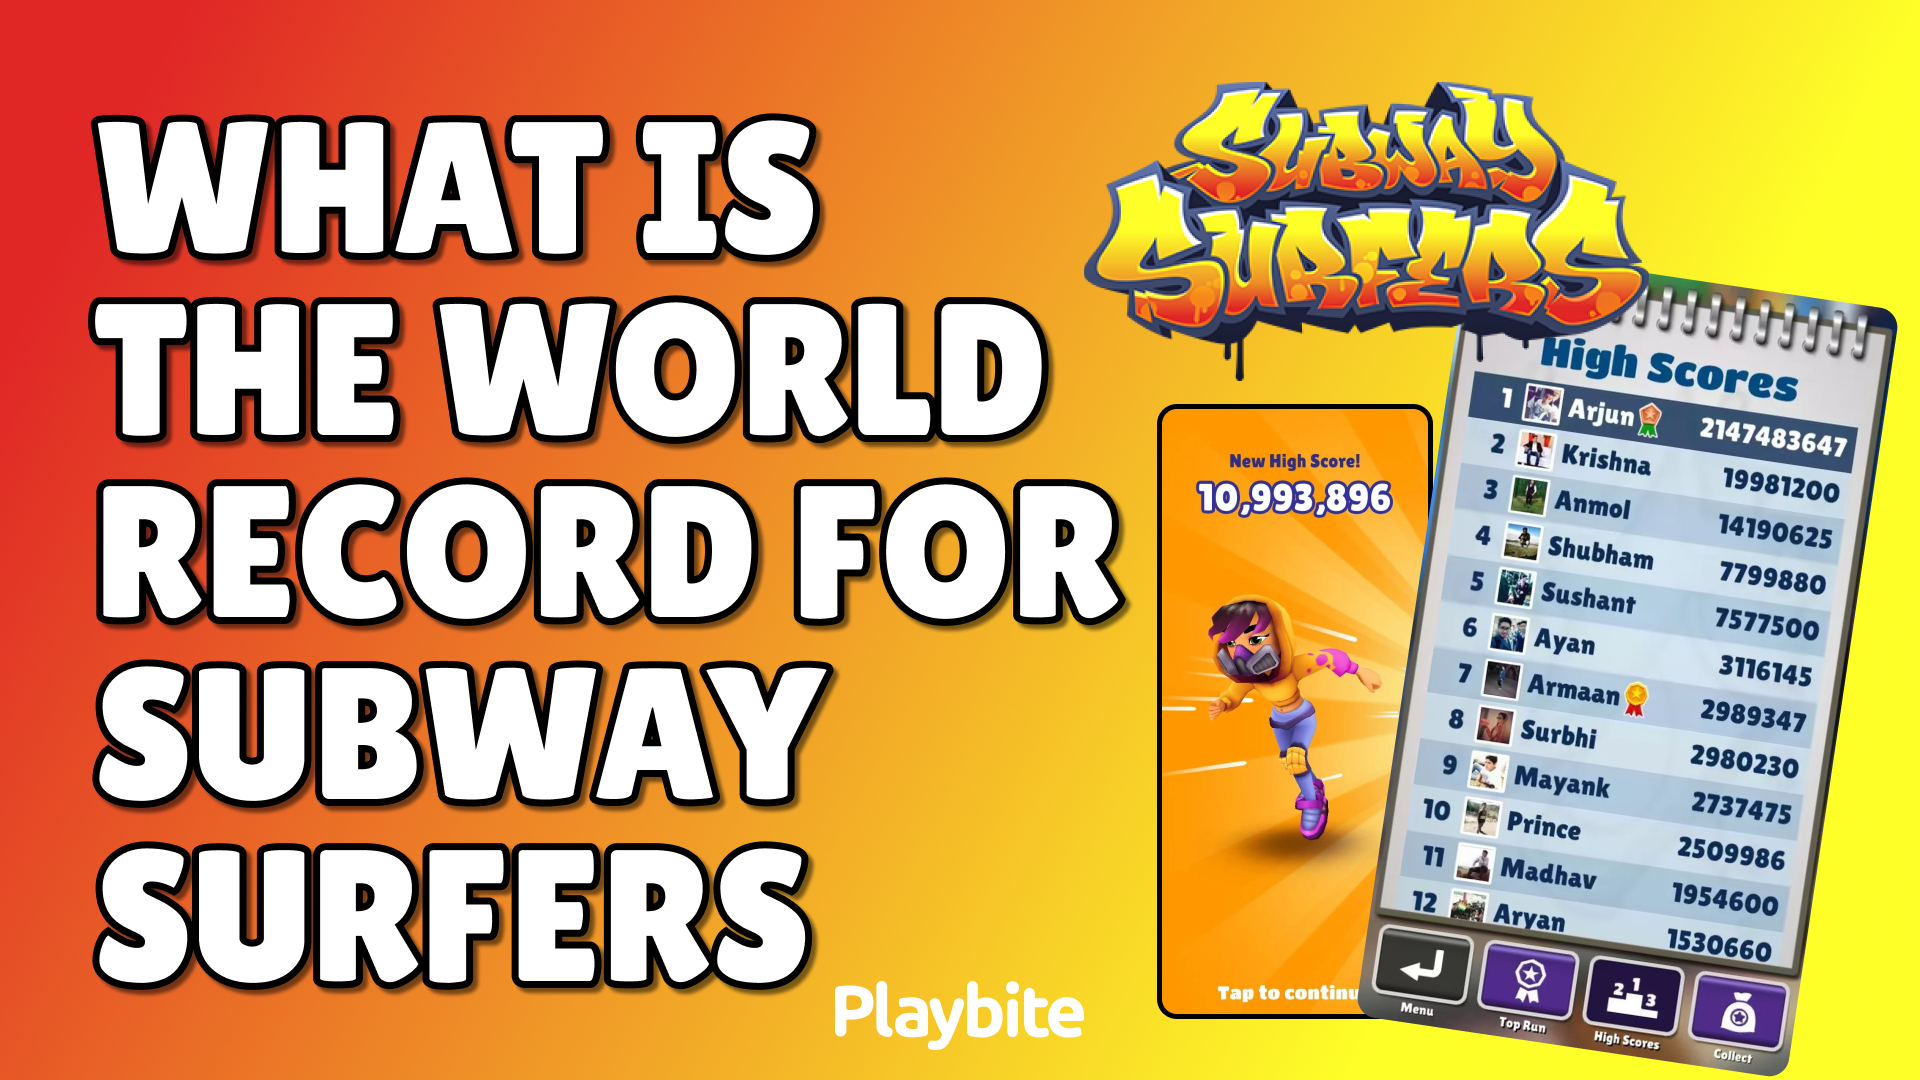 What Is The World Record For Subway Surfers?